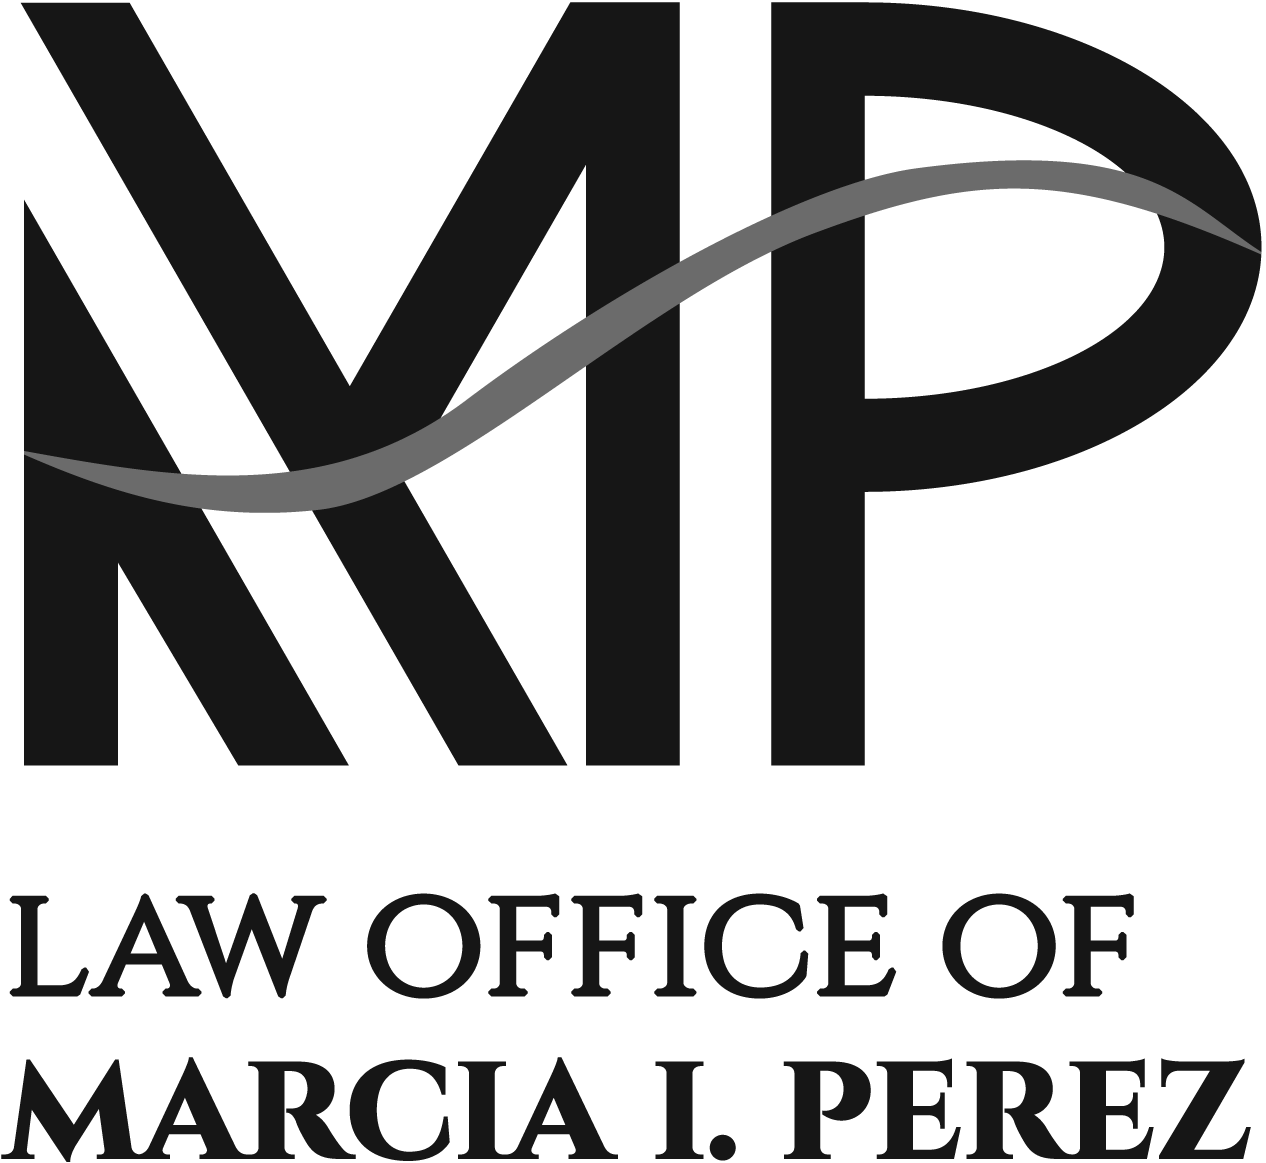 Law Office of Marcia I. Perez